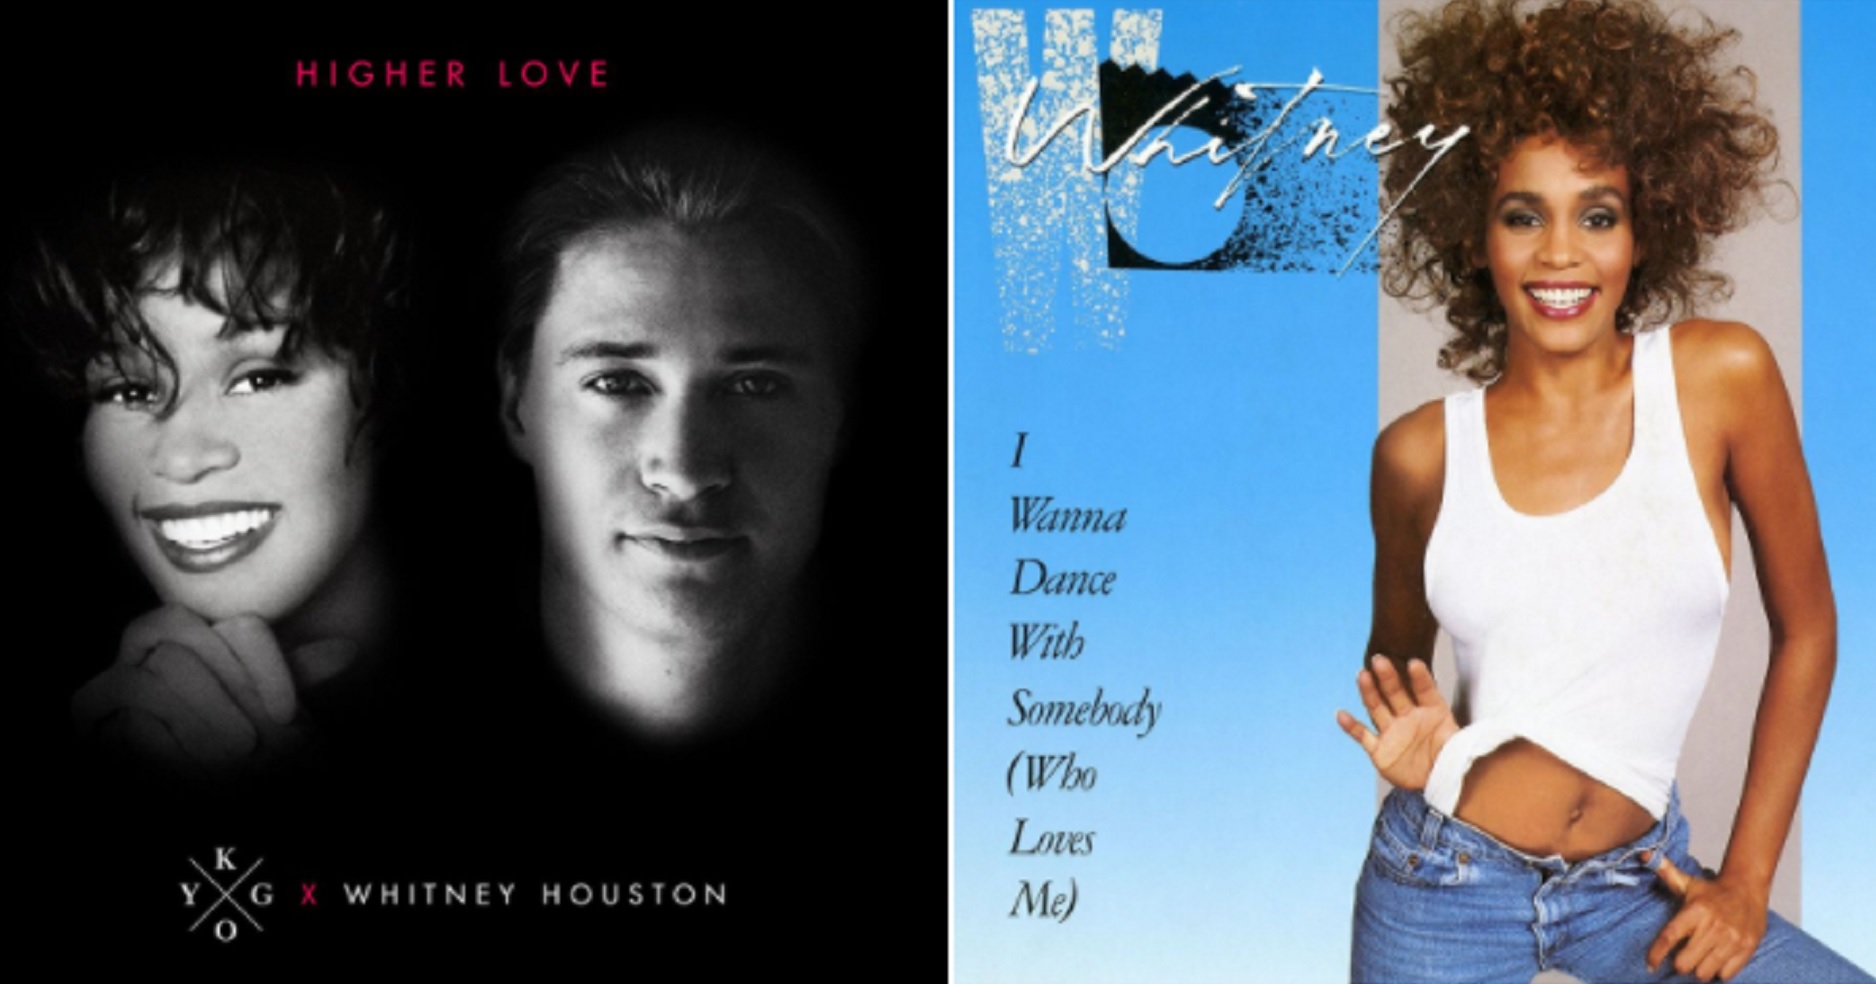 Whitney Houston Earns Even More Platinum Certifications With ‘Higher Love’ & ‘I Wanna Dance With Somebody’